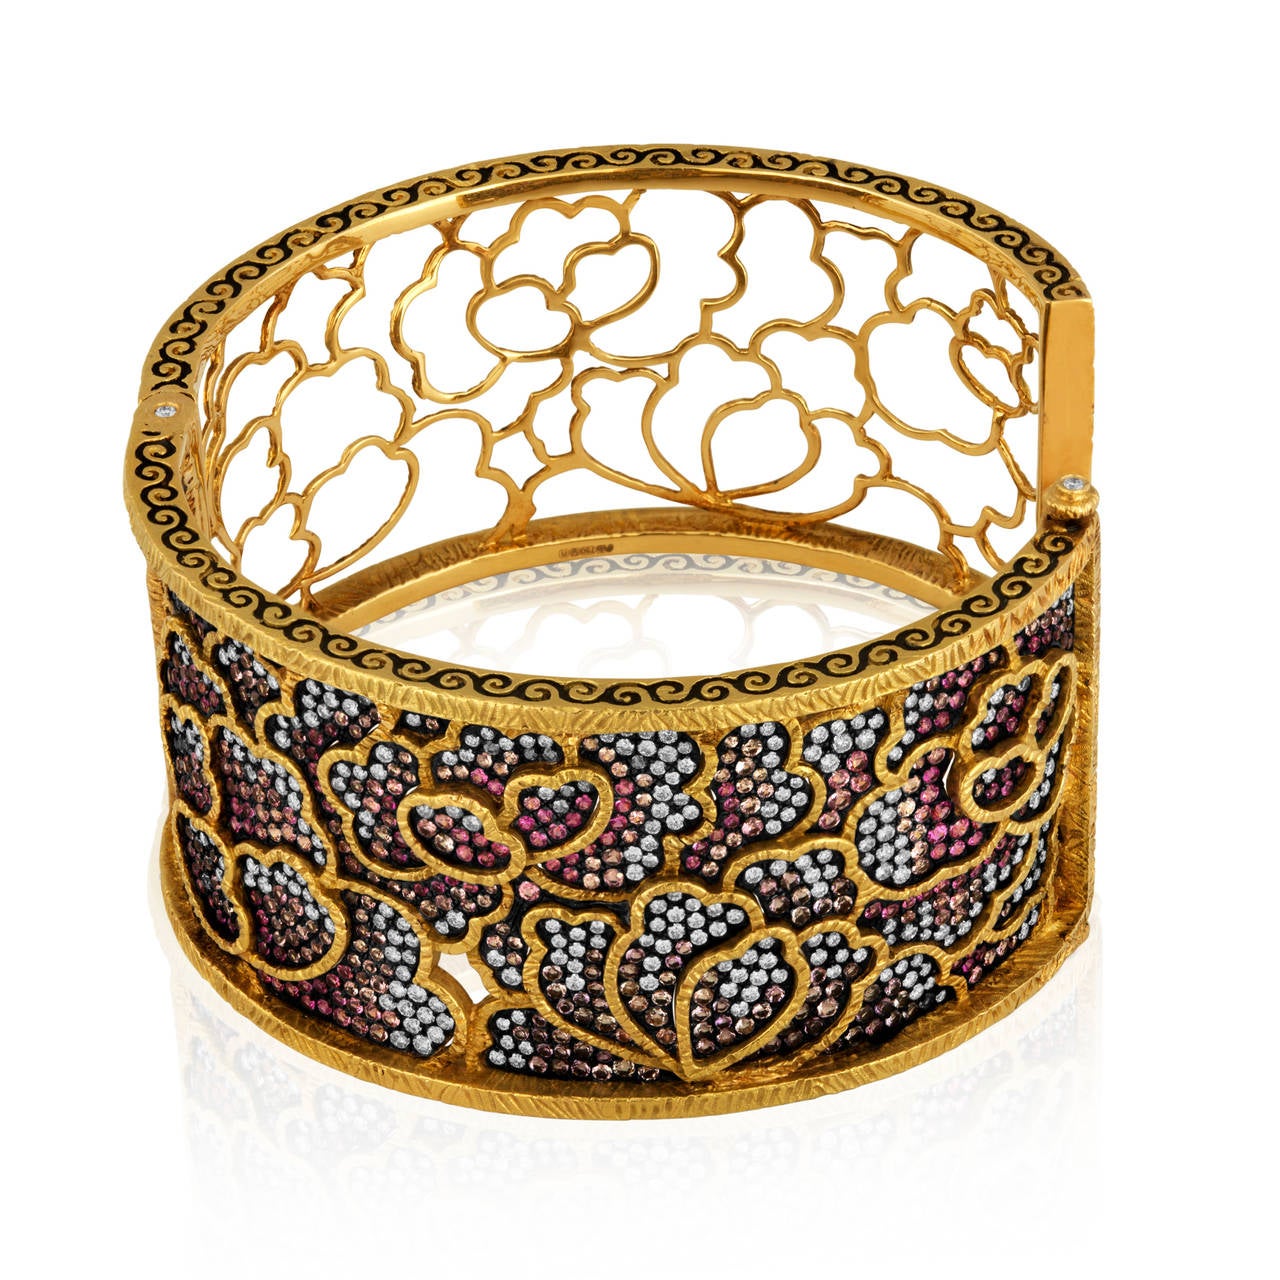 Dickson Yewn Cloisonne Collection.
The Bangle is 18K Yellow Gold.
There are 4.50 Carats in Diamonds F VS.
There are 5.00 Carats in Pink Sapphires.
There are 5.00 Carats in Amethyst.
The bangle weighs 96.7 grams.
The bangle is 1.25